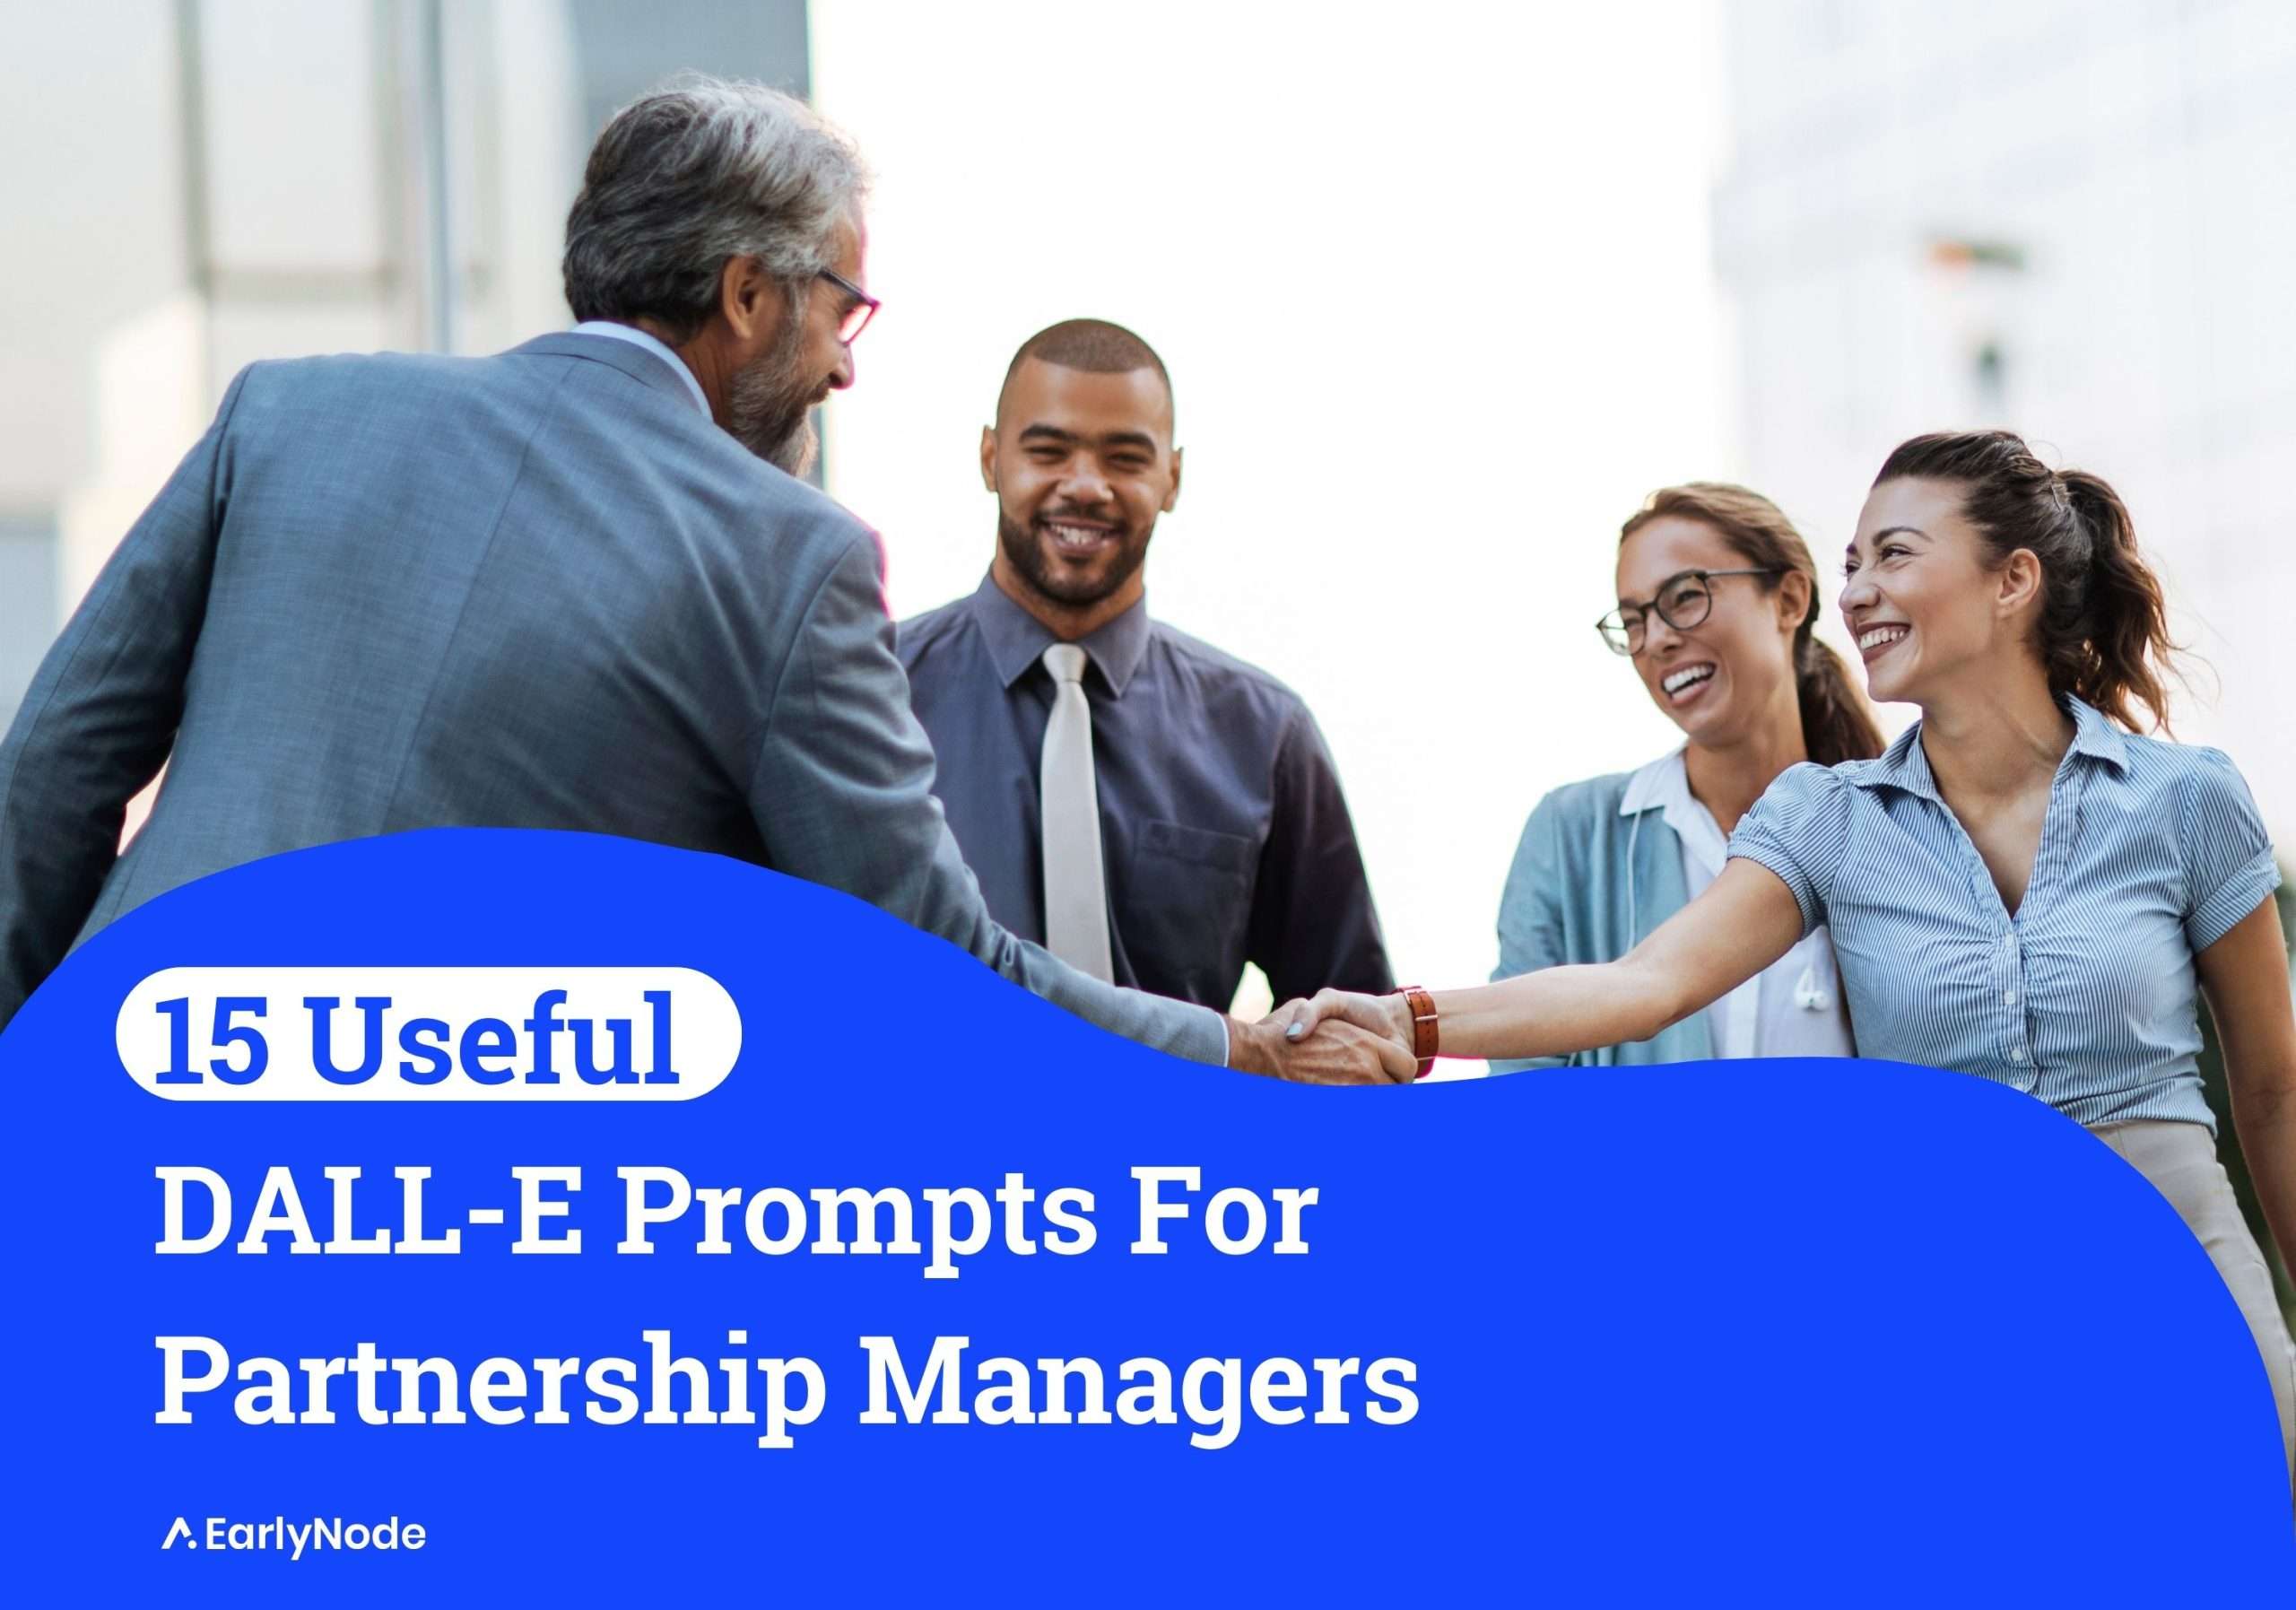 15+ Helpful DALL-E Prompts for Partnership Managers